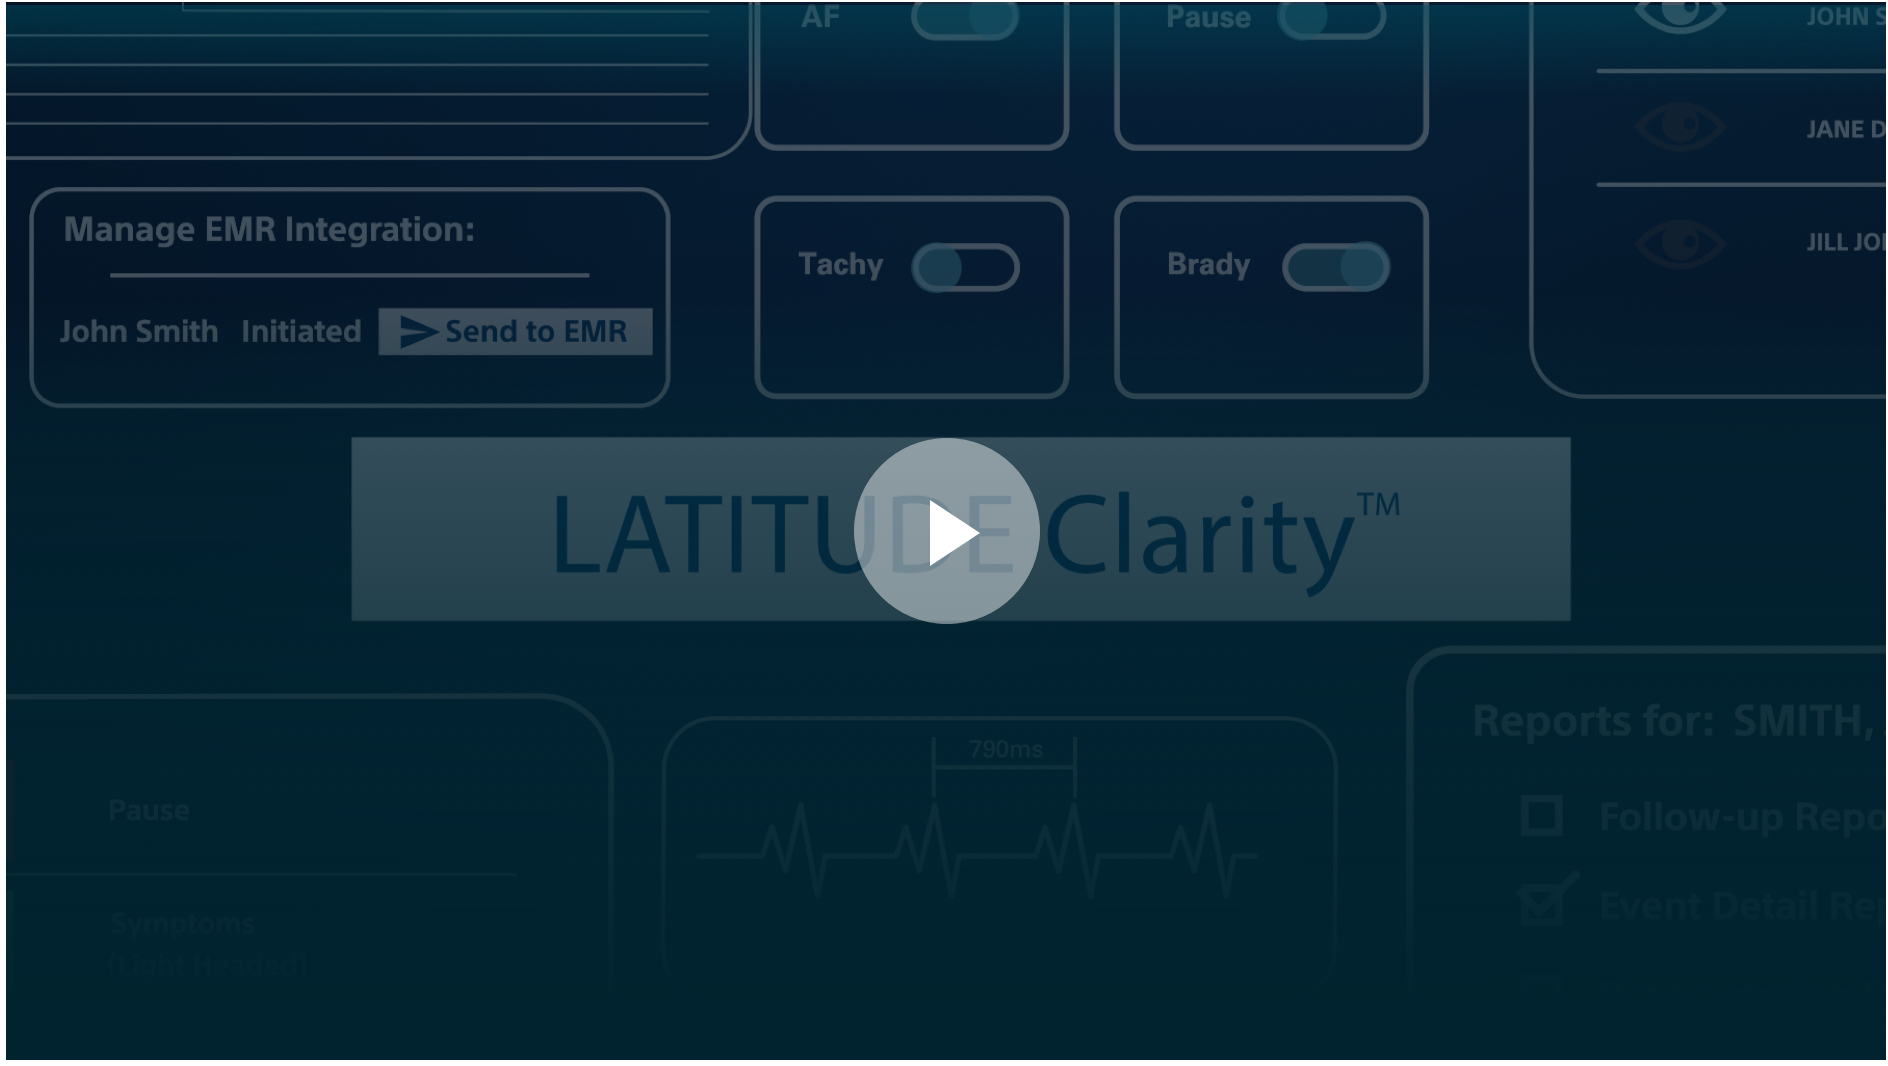 Video image with "Putting data to work for you. See how the LATITUDE Clarity System helps you see the bigger picture when it matters, streamline your workflow and enhance patient care."